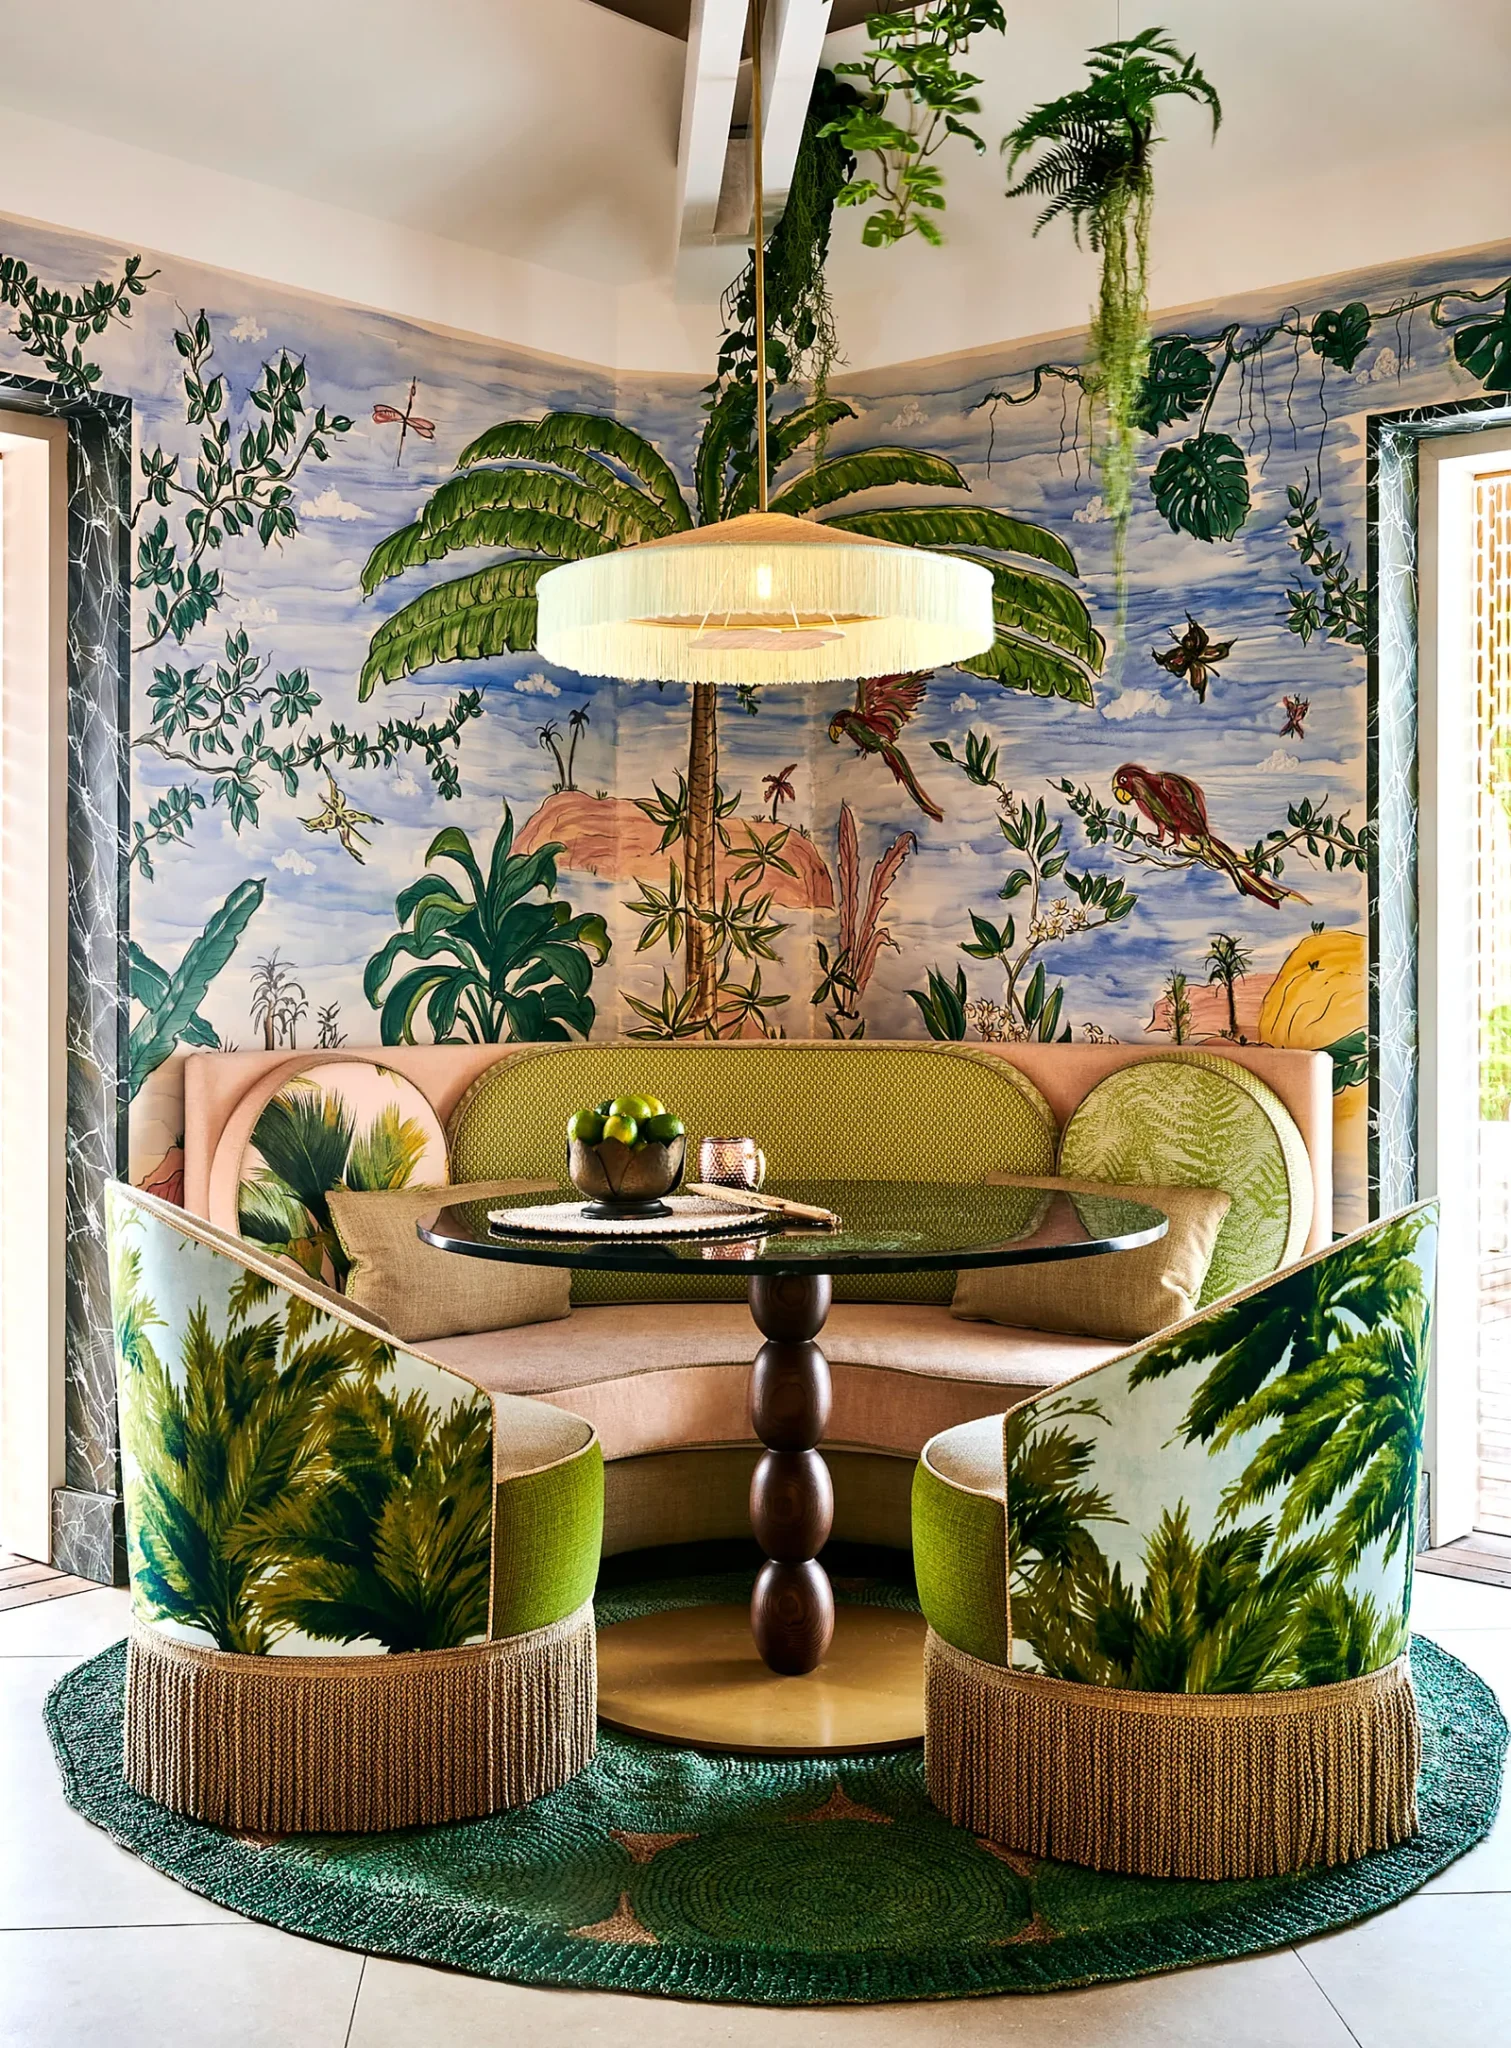 Armchairs and sofa upholstered in tropical print matching the wallpaper behind them